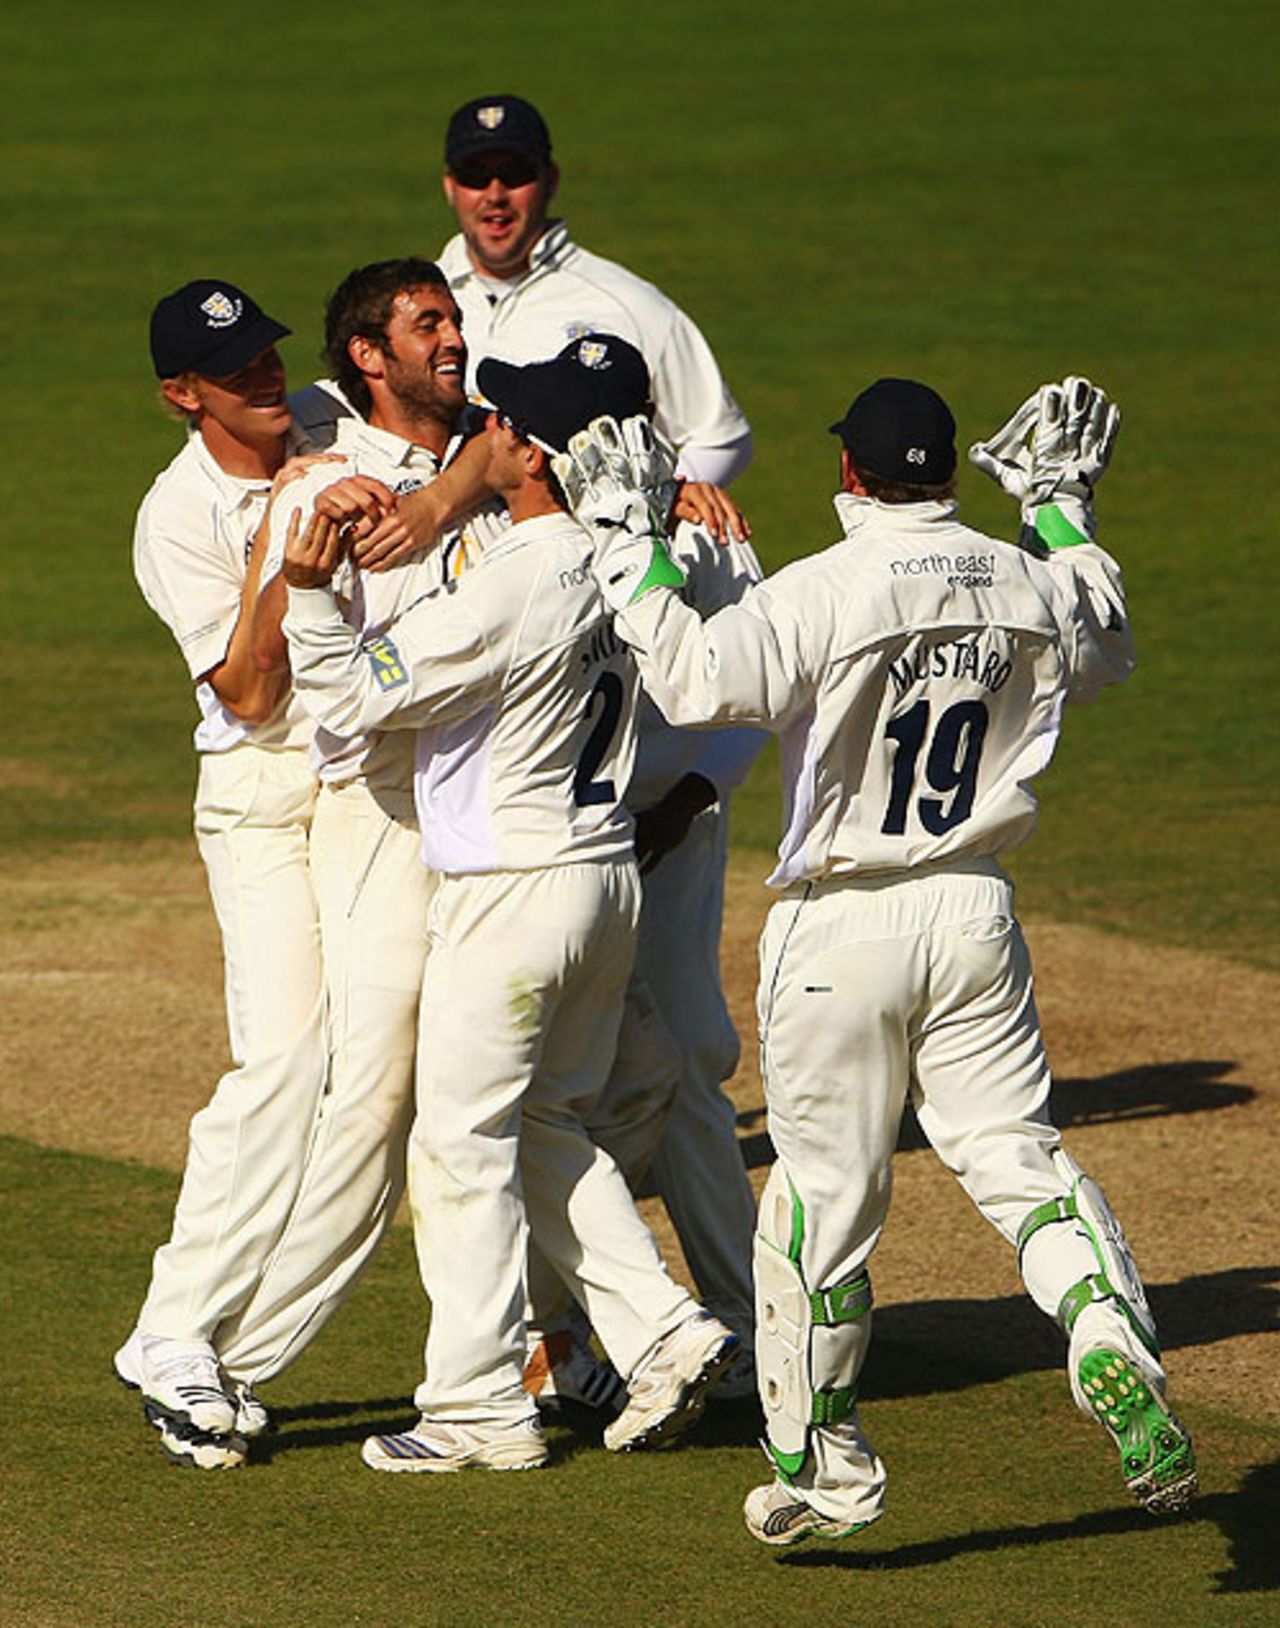 Liam Plunkett strikes as Durham close in on victory over Nottinghamshire at Chester-le-Street, September 12, 2009